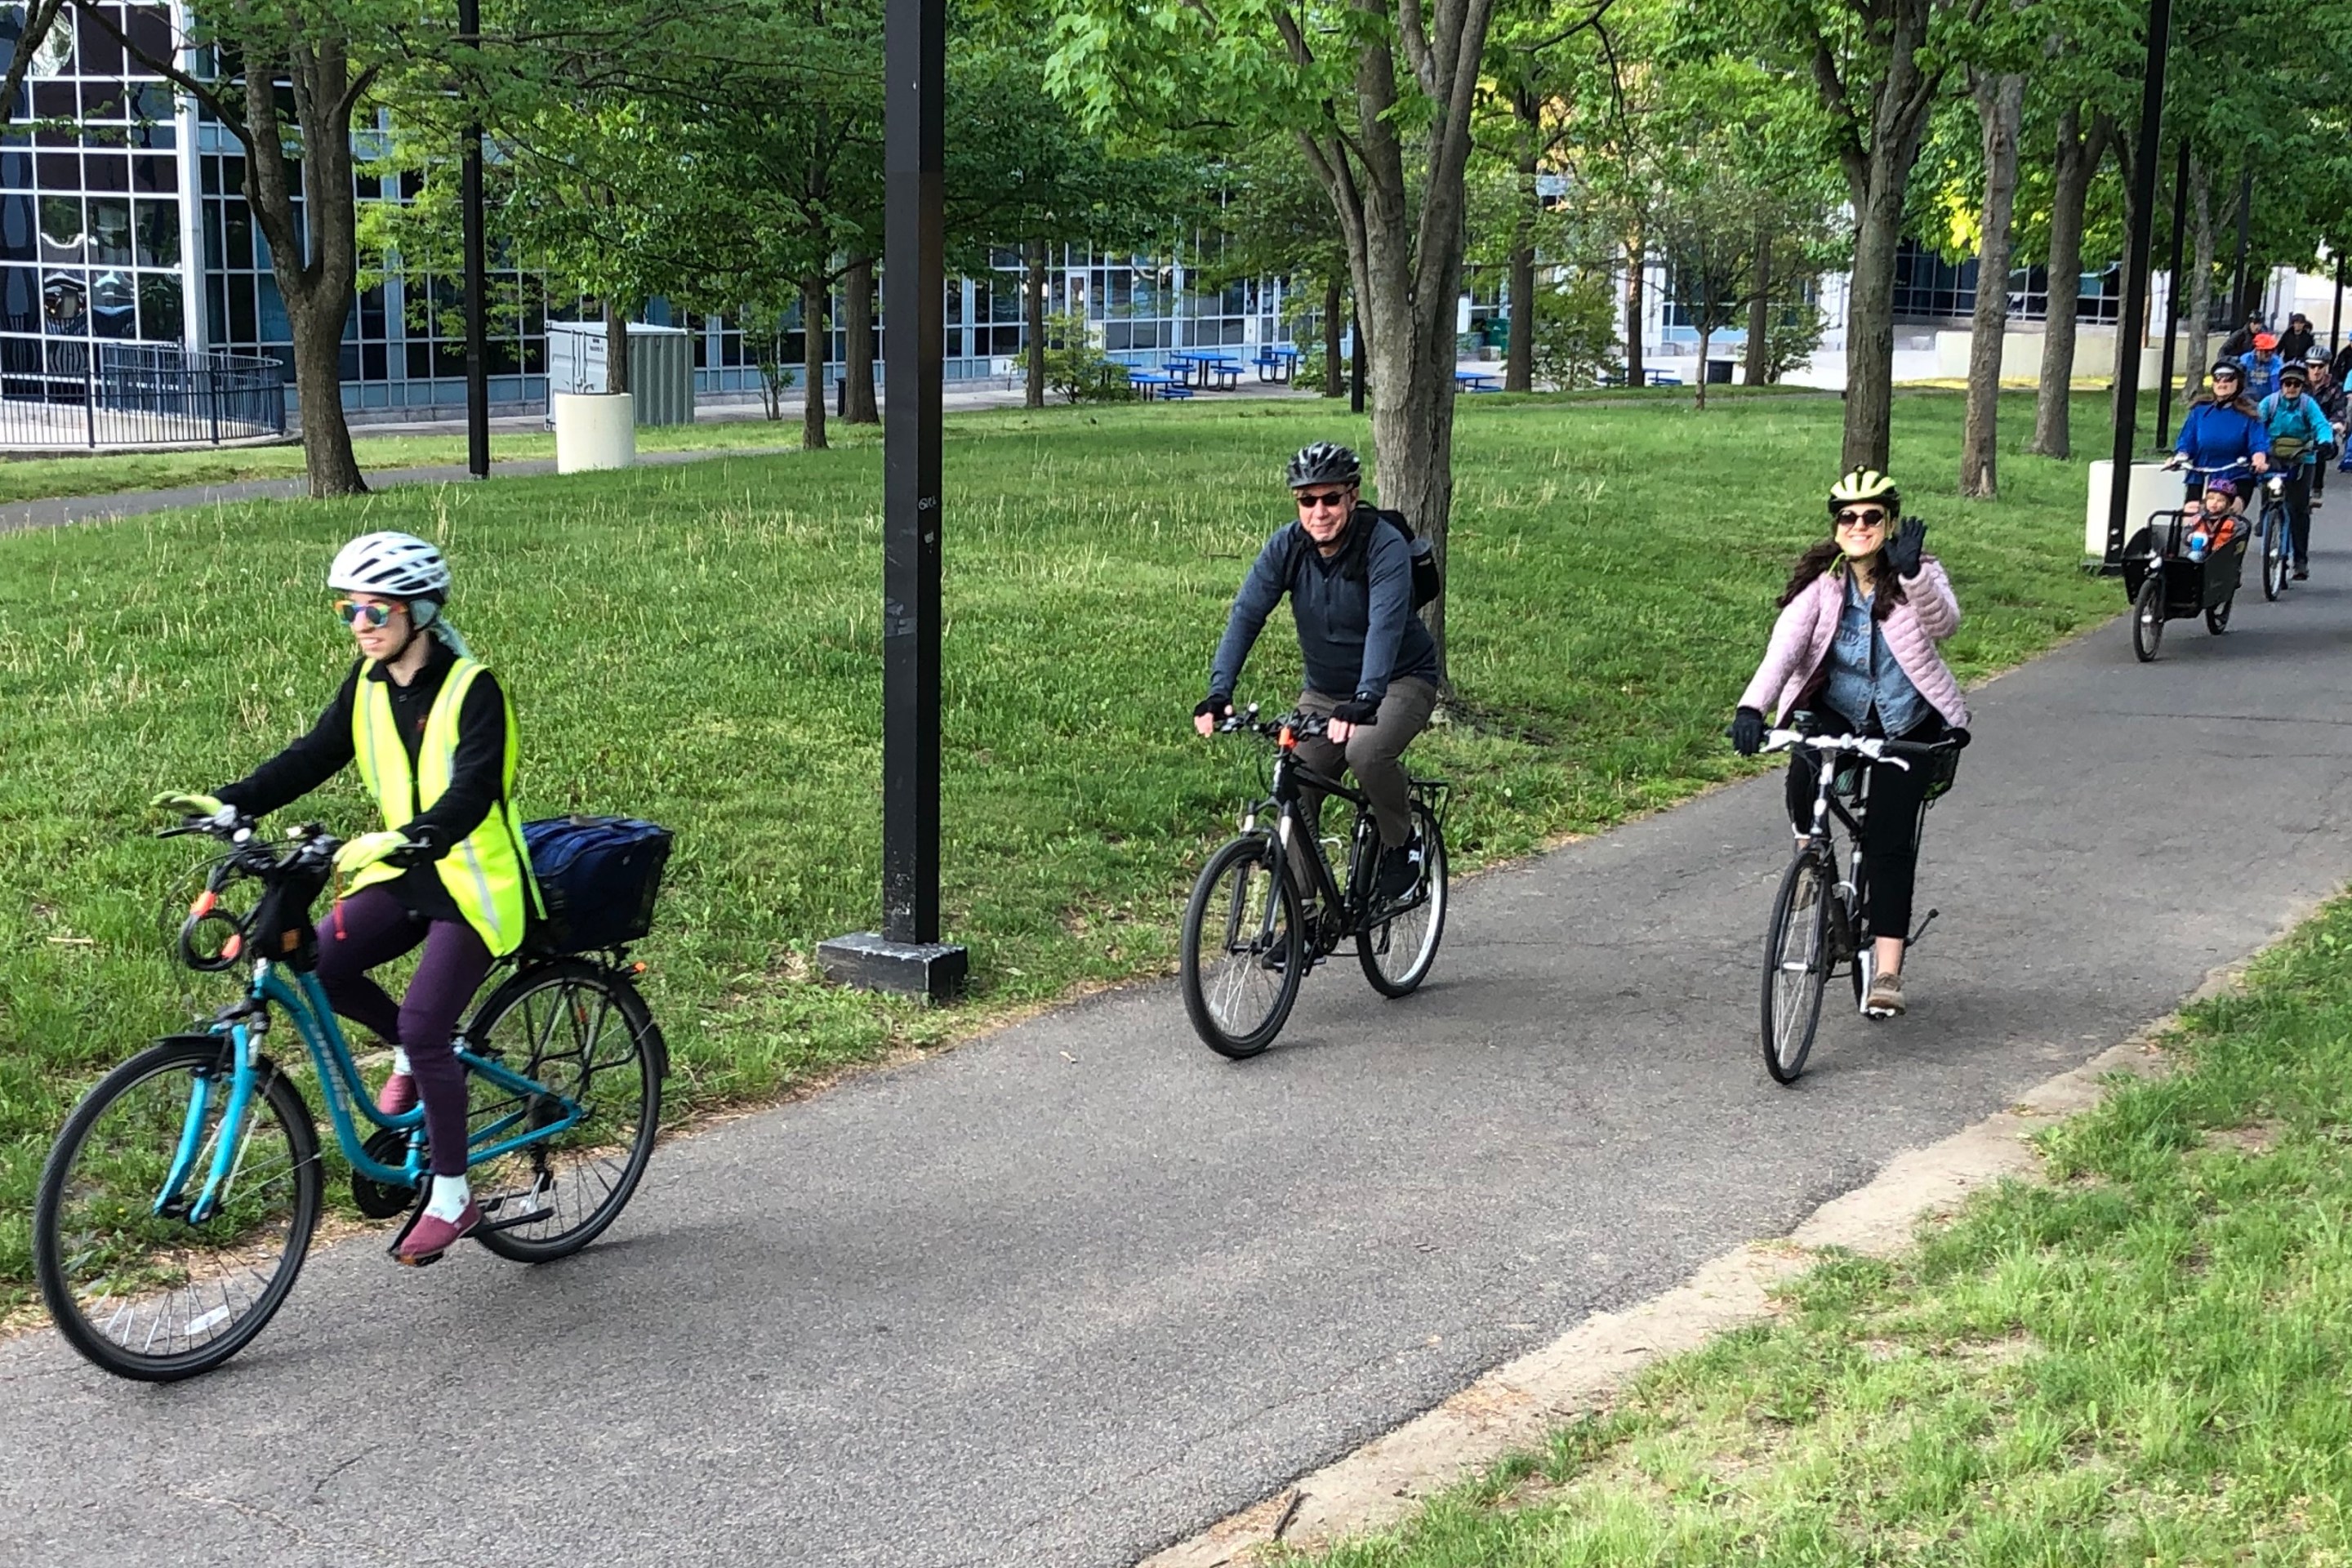 Three people riding bicycles down a paved pathway through a shady park on the SW Corridor. Behind them in the upper right corner is another crowd of people on bikes.